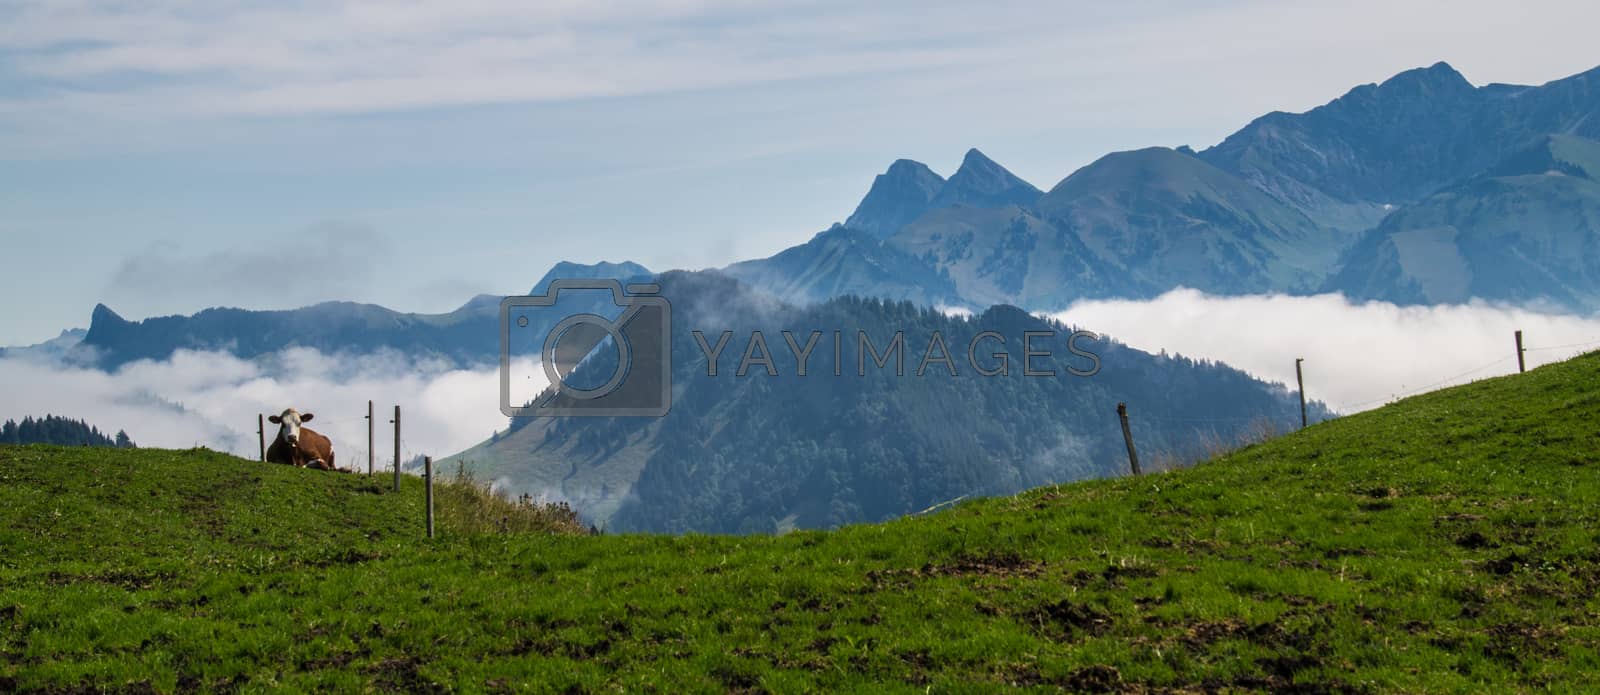 Royalty free image of landscape of the Swiss Alps by bertrand